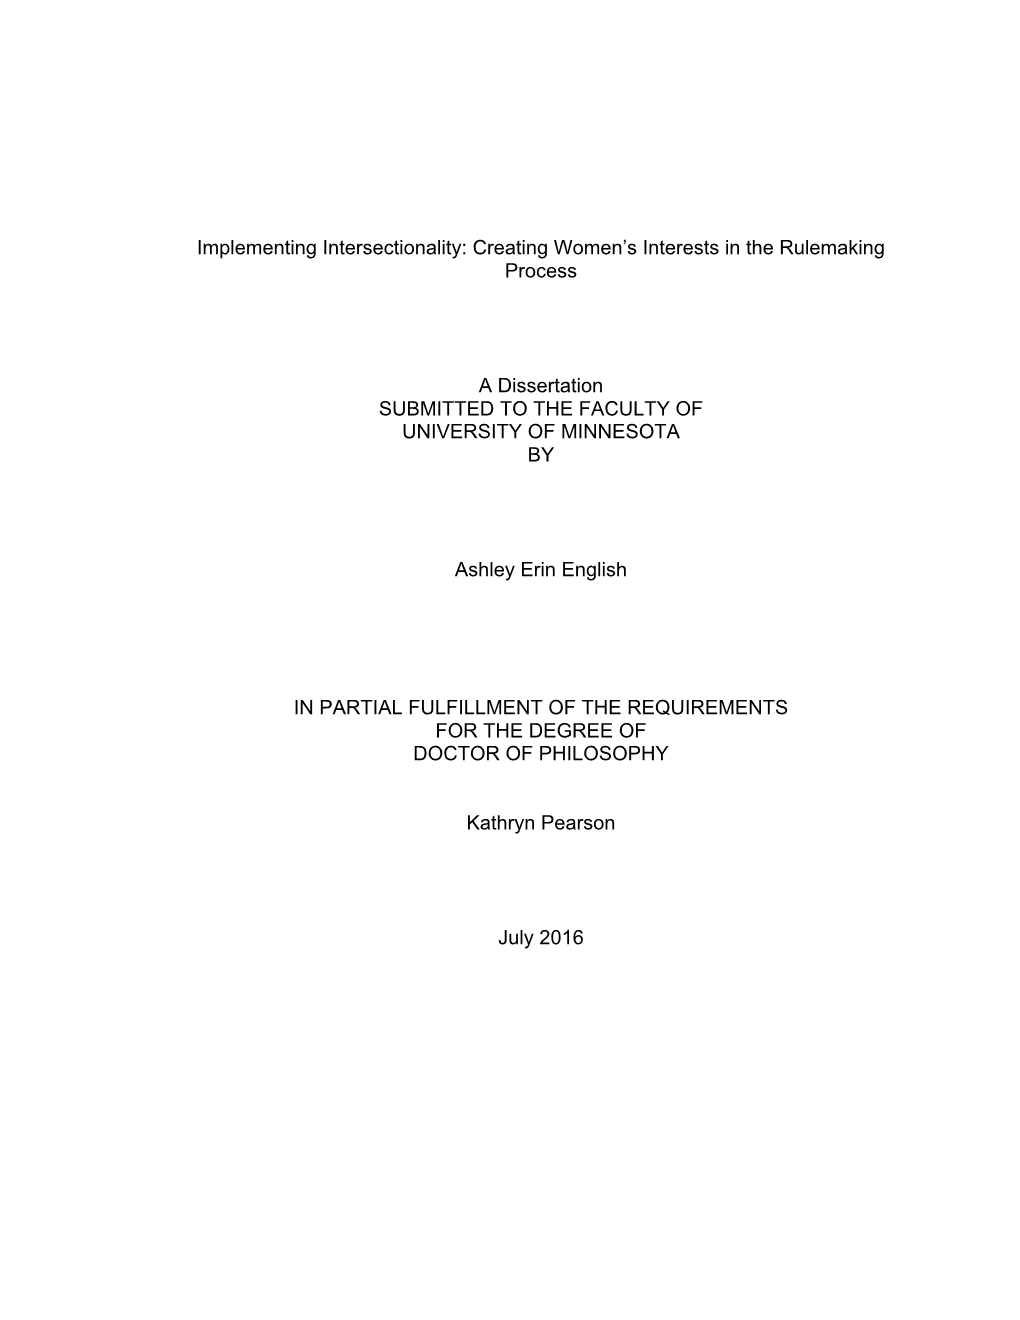 Creating Women's Interests in the Rulemaking Process a Dissertation